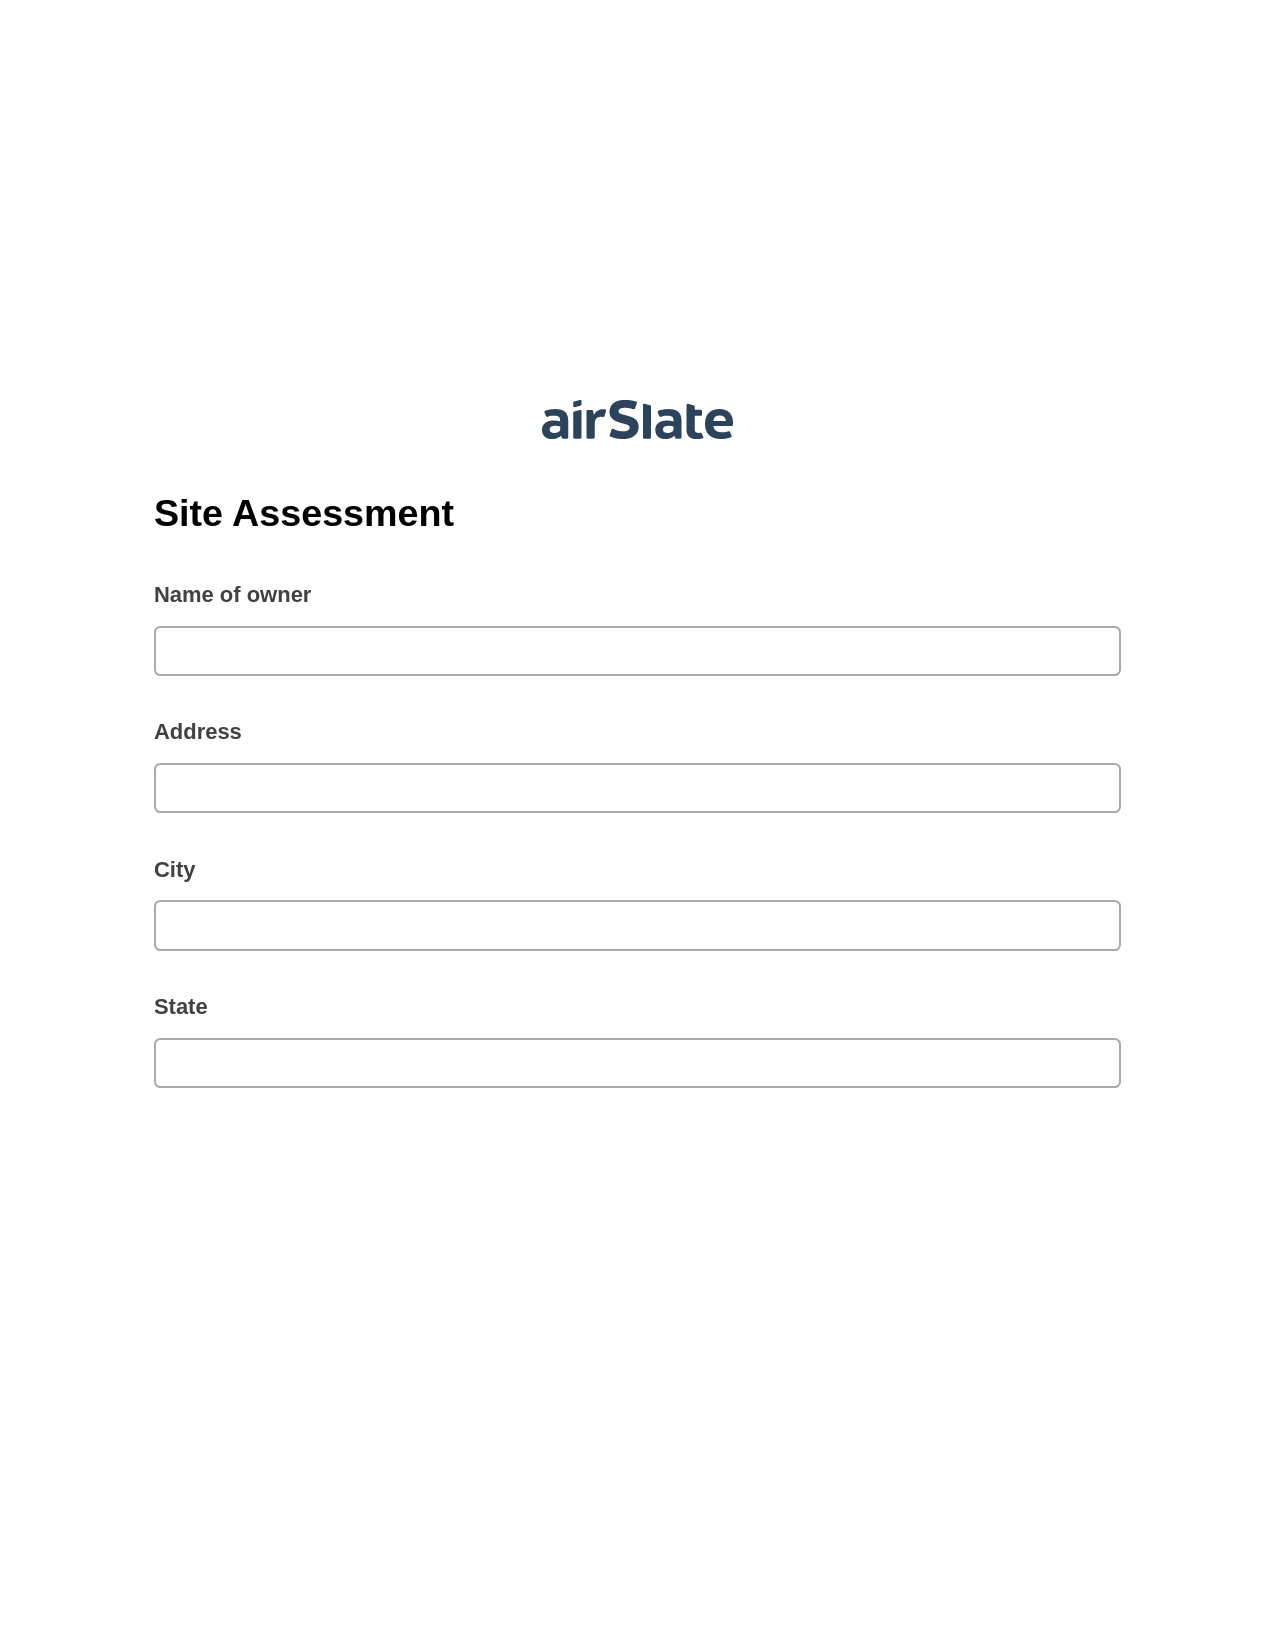 Site Assessment Pre-fill from Salesforce Records with SOQL Bot, Revoke Access Bot, Export to Formstack Documents Bot